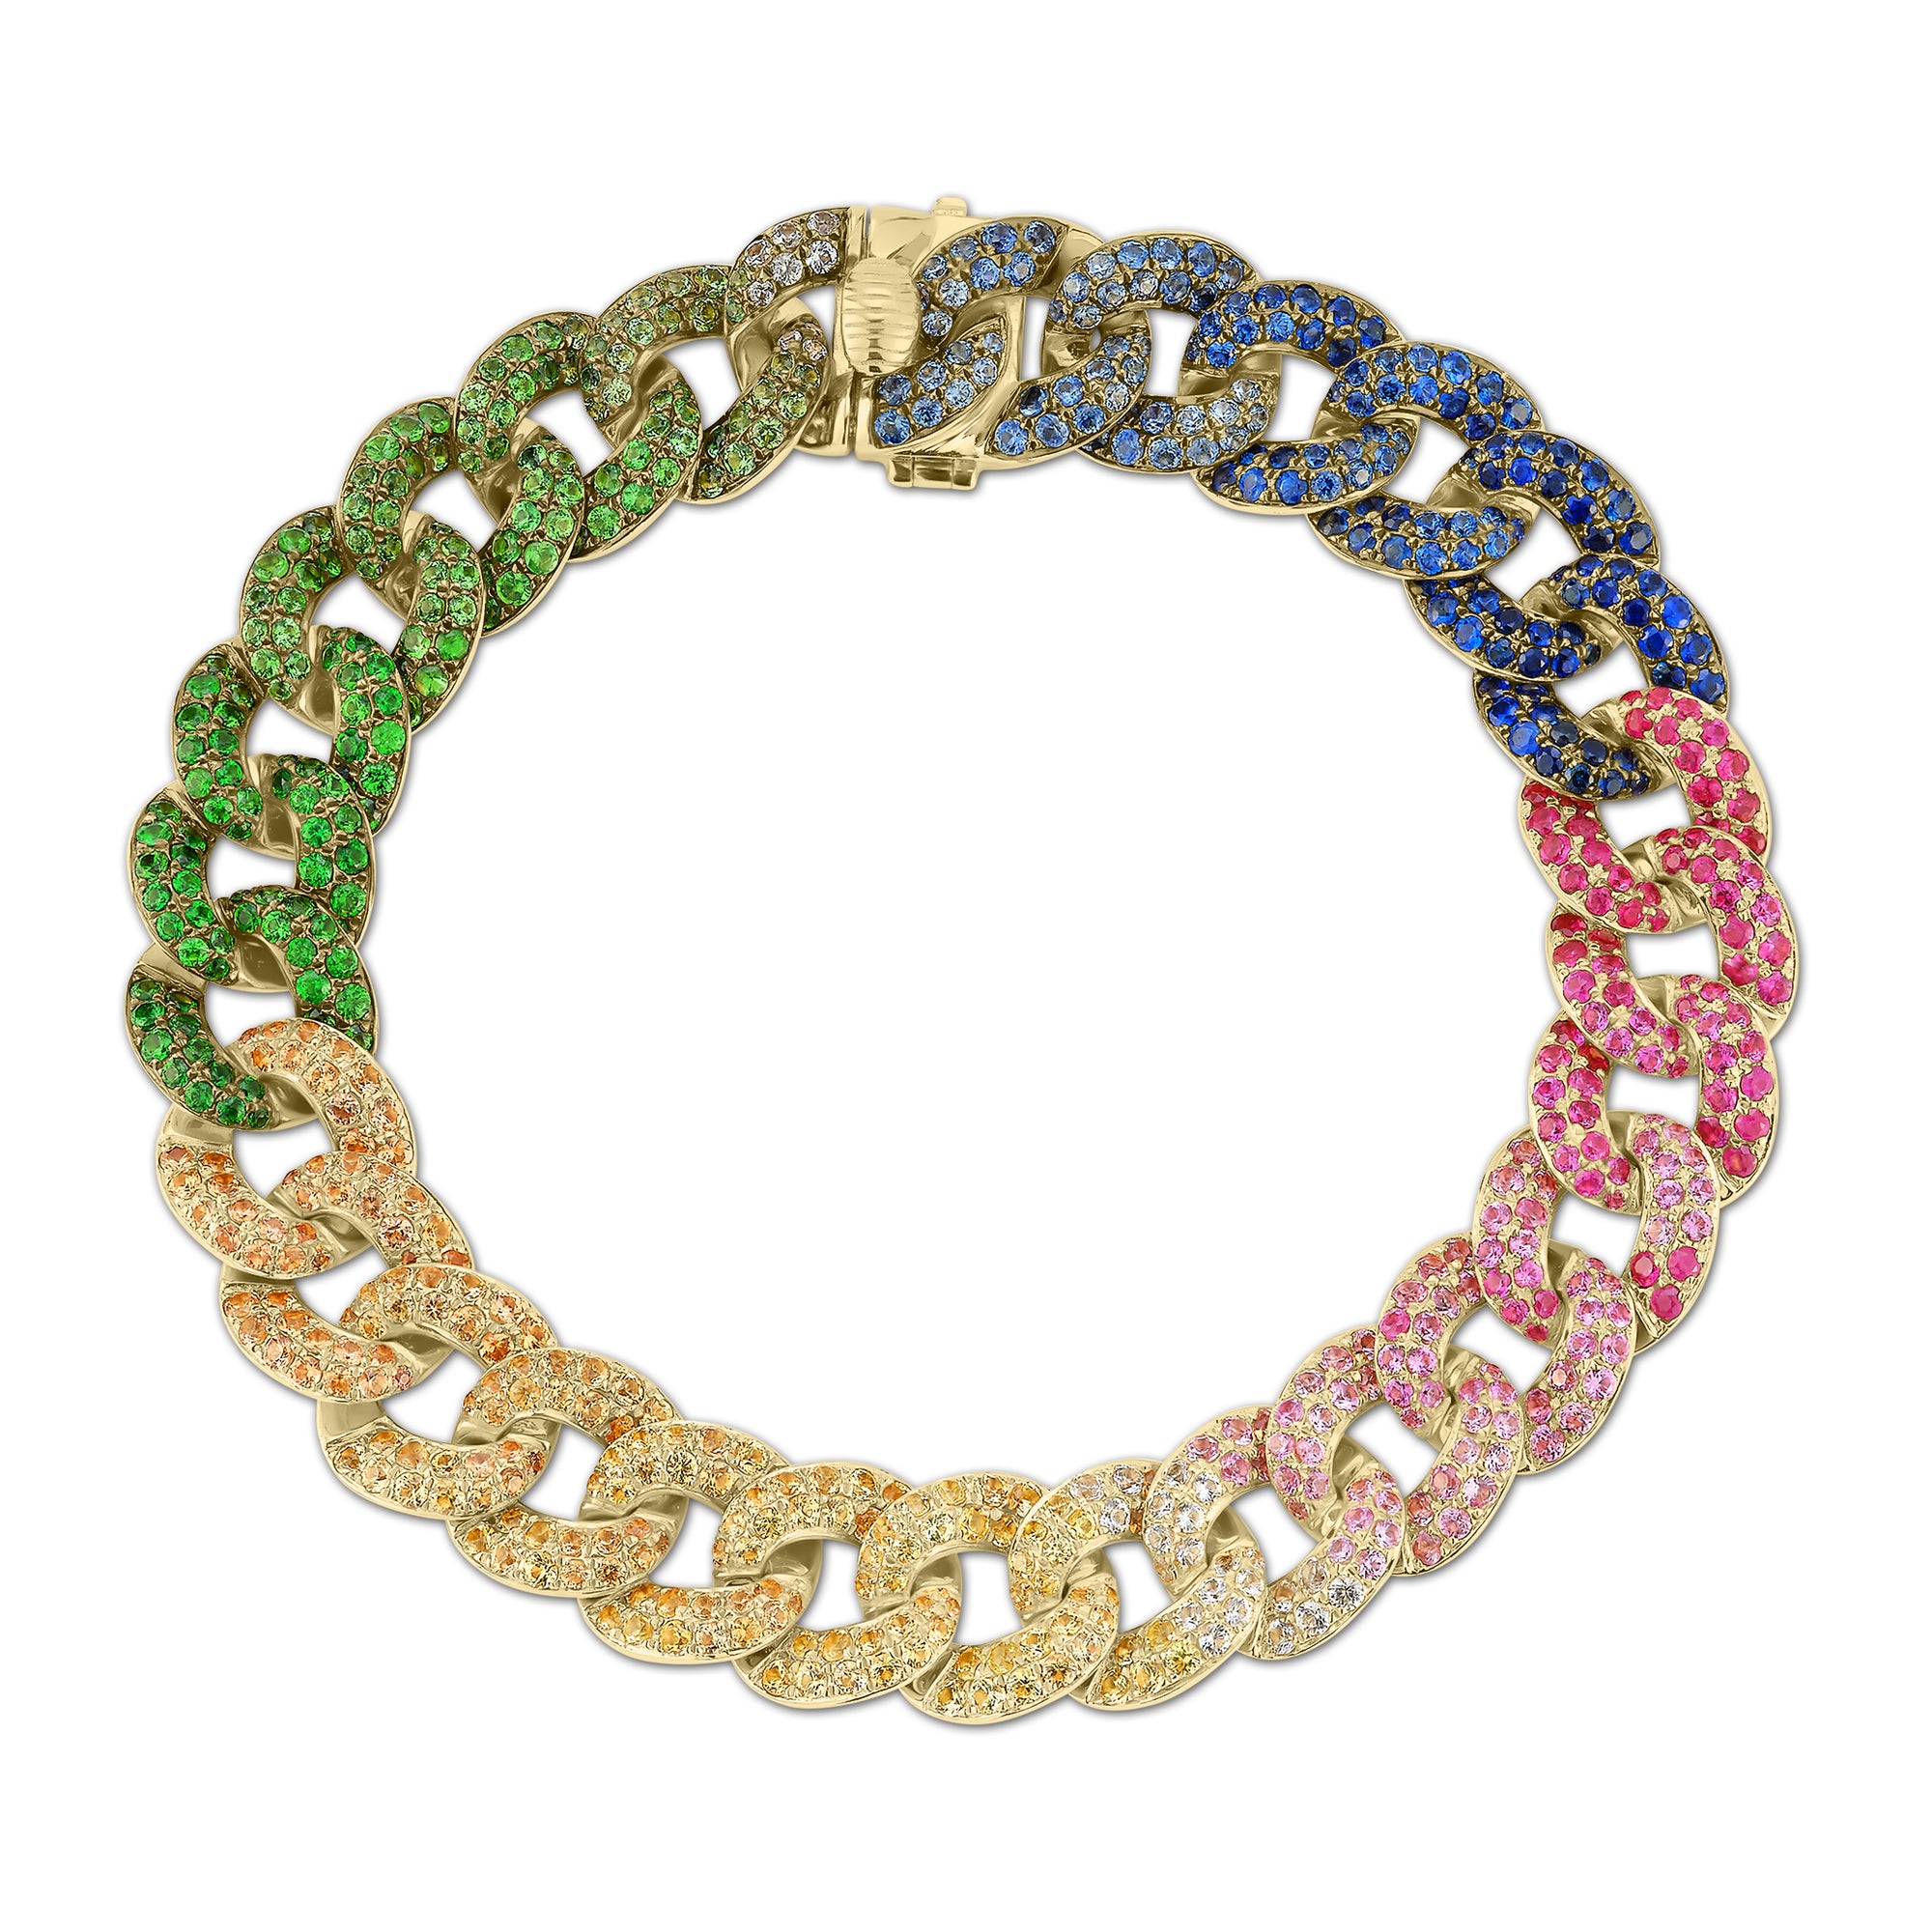 Rainbow Sapphire Curb Chain Bracelet - 14K gold weighing 25.78 grams  - 684 sapphires weighing 8.11 carats